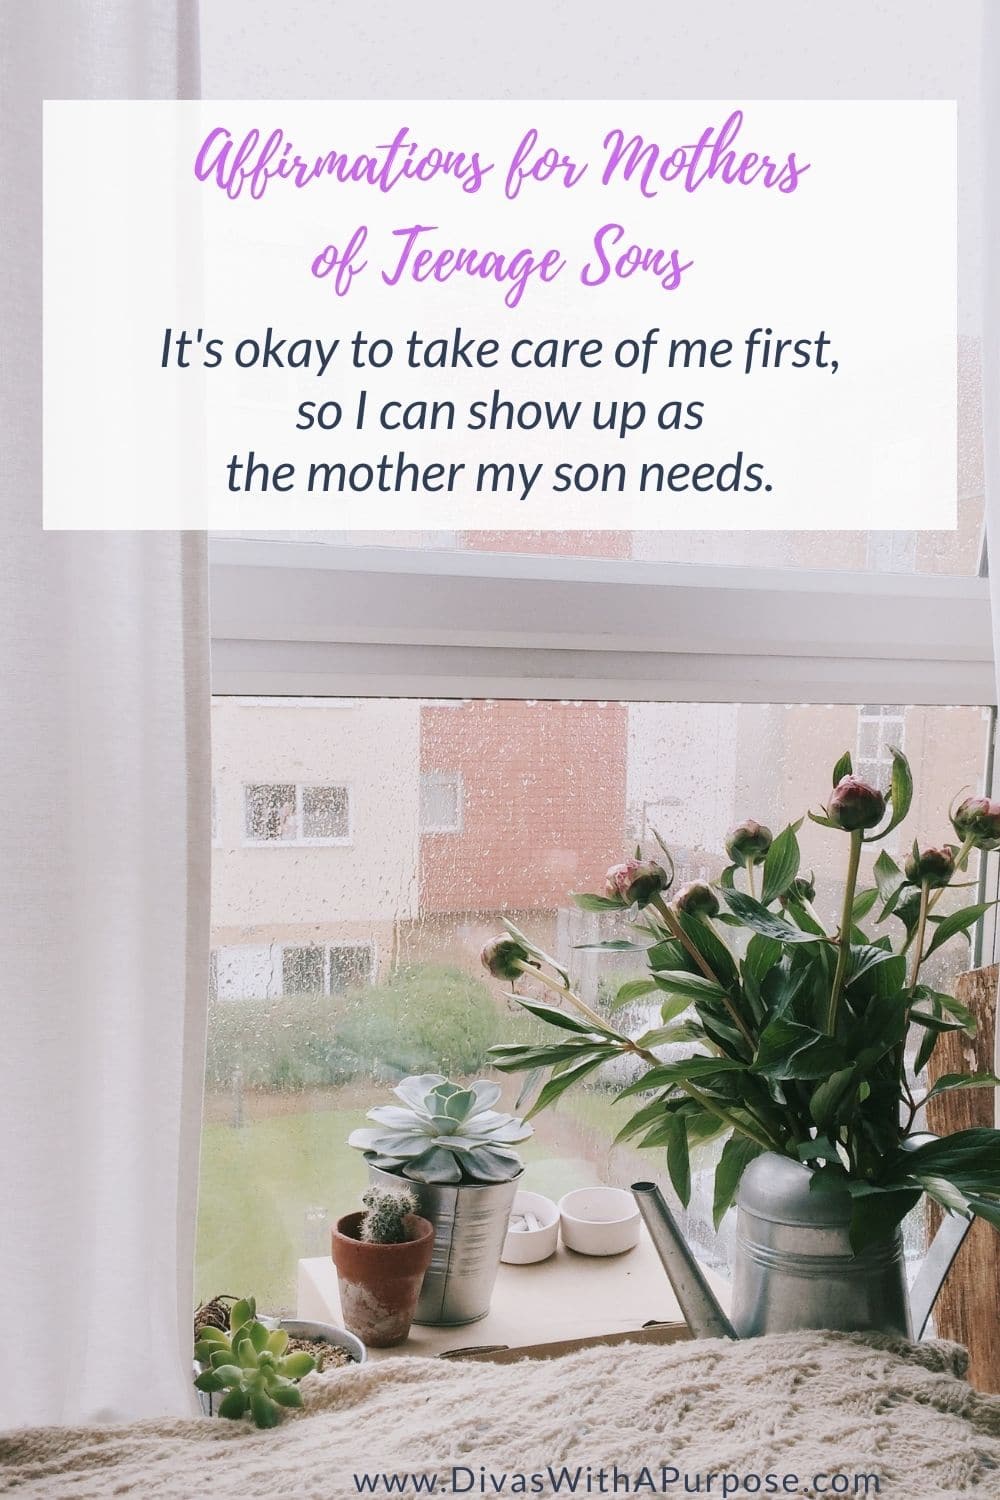 It's okay to take care of you first | 30 Days of Affirmations for Mothers of Teenage Sons